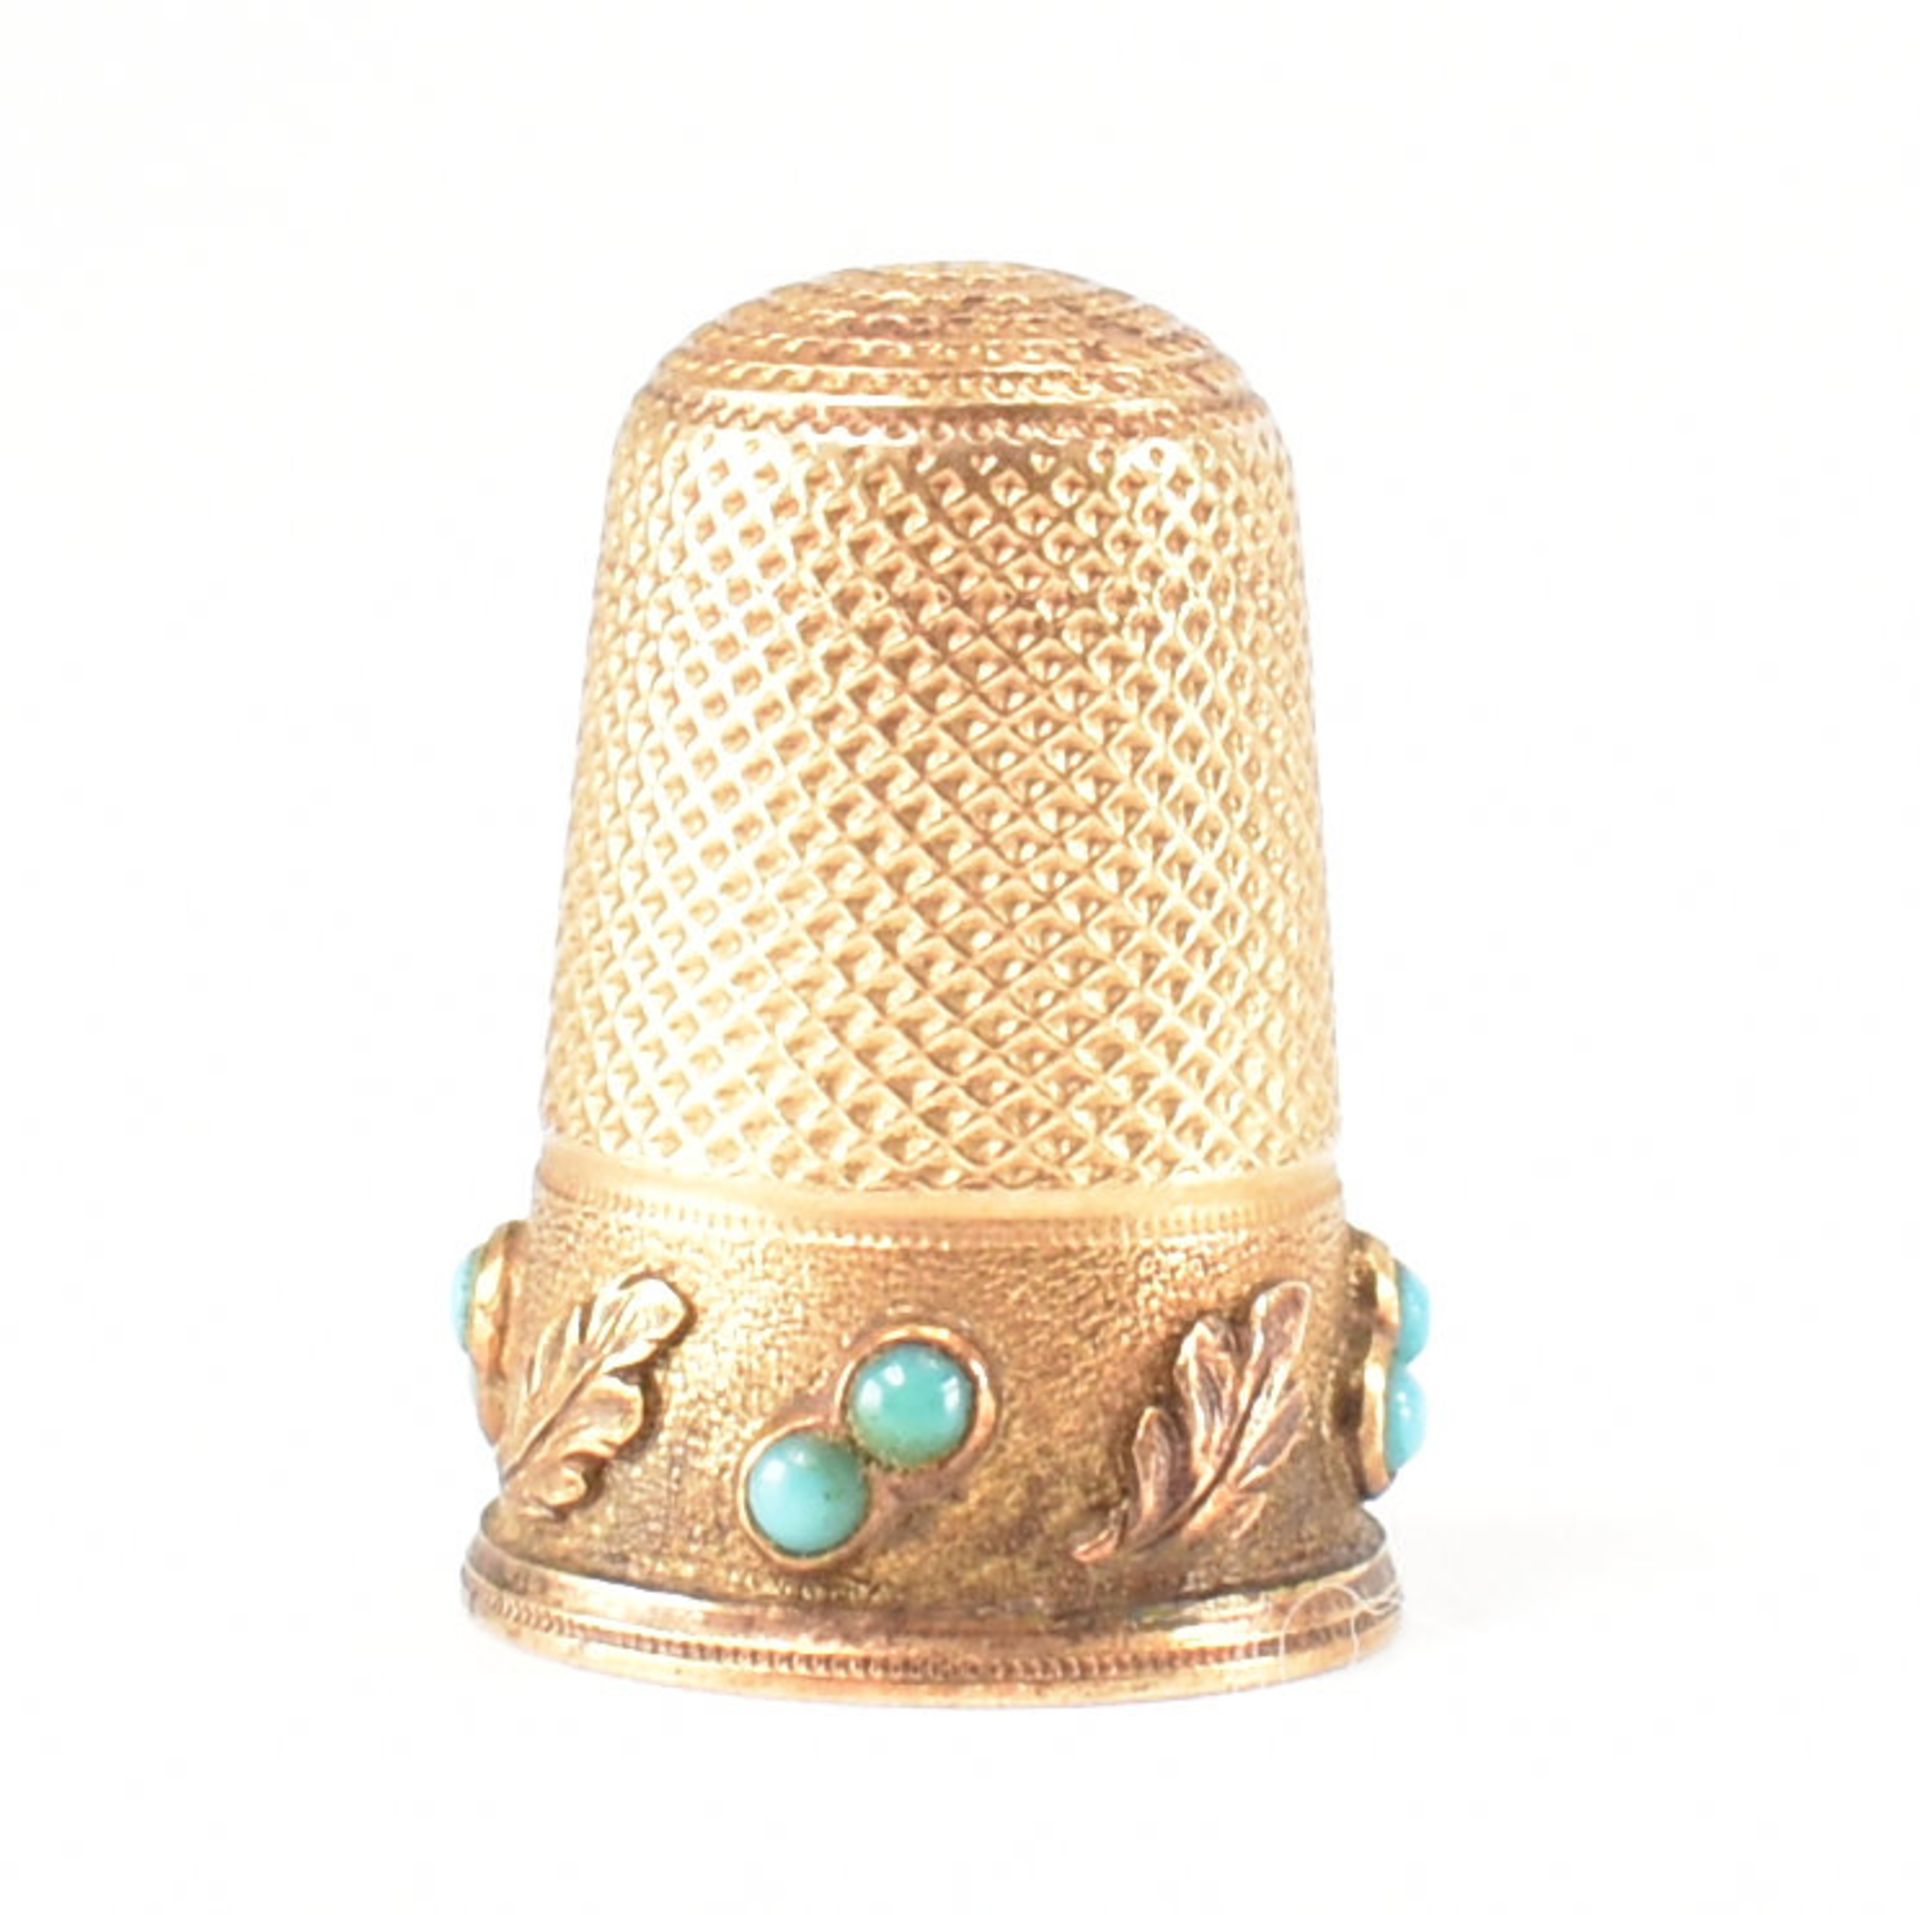 VICTORIAN GOLD & TURQUOISE THIMBLE - Image 3 of 7